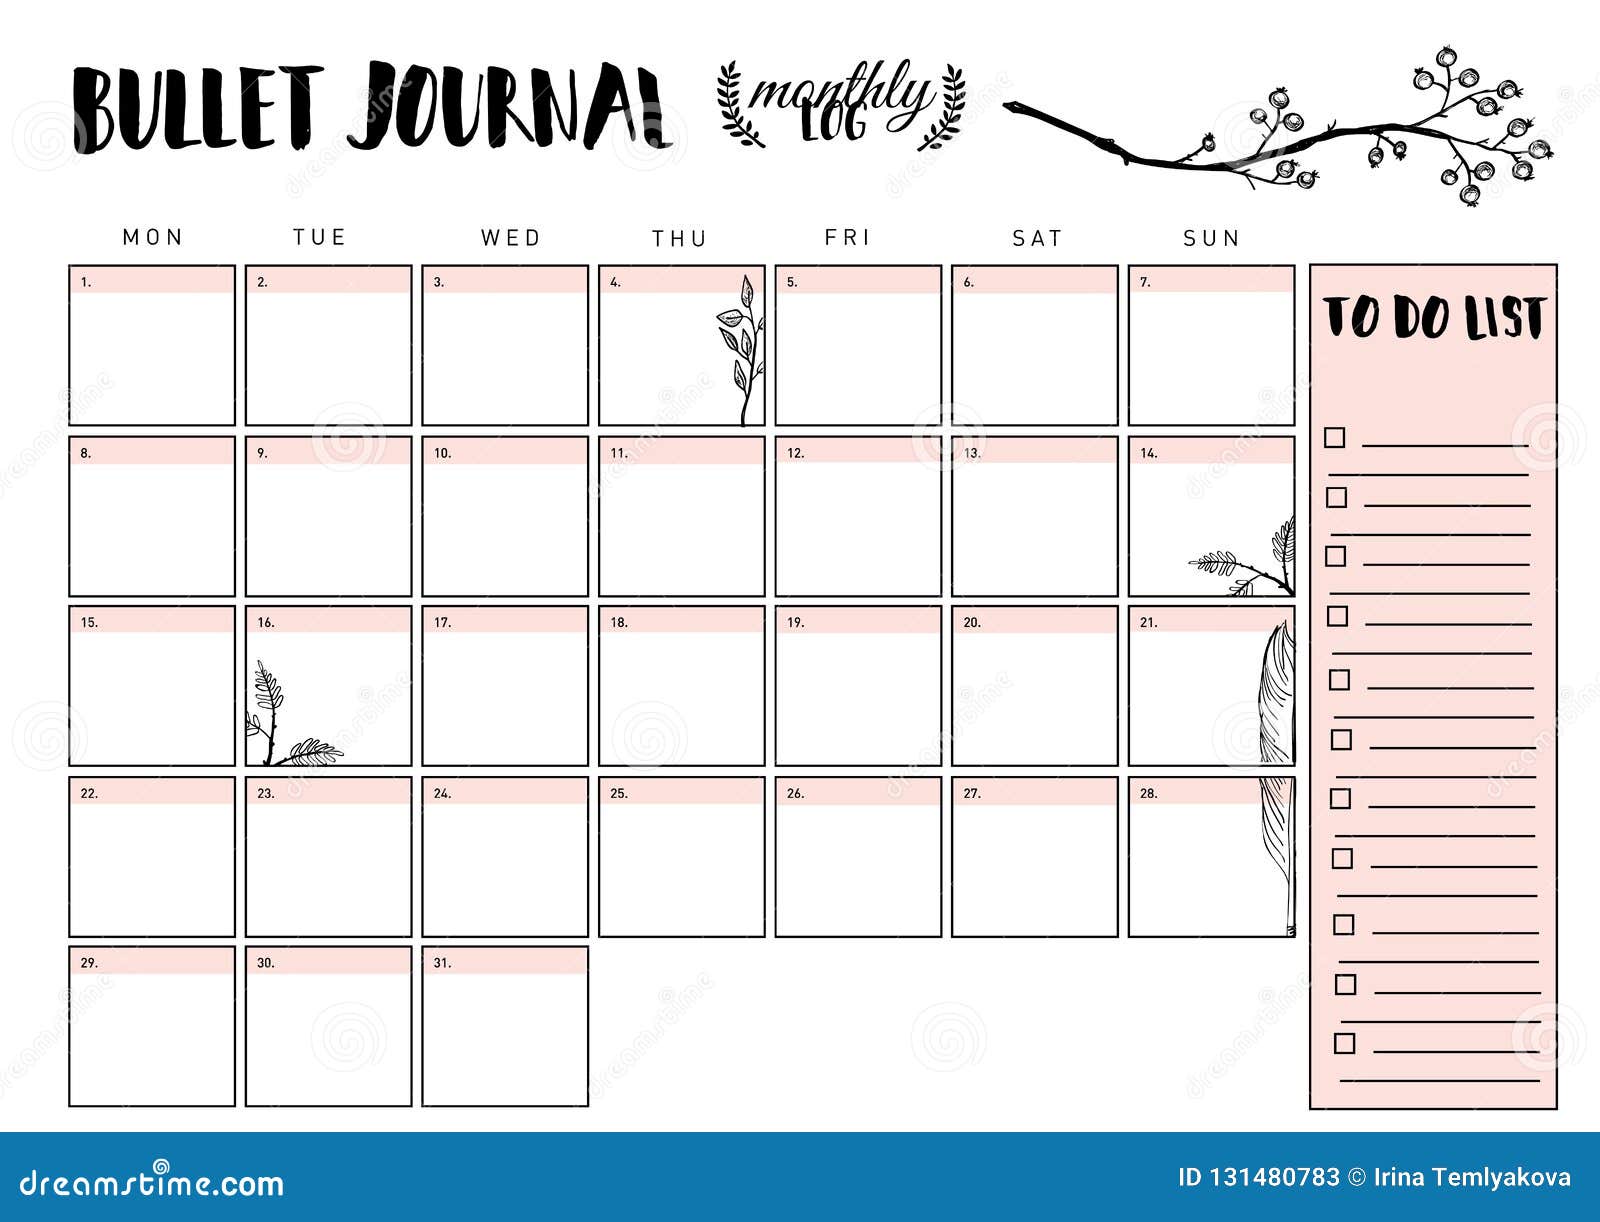 bullet journal year monthly planner.   with handdrawing .